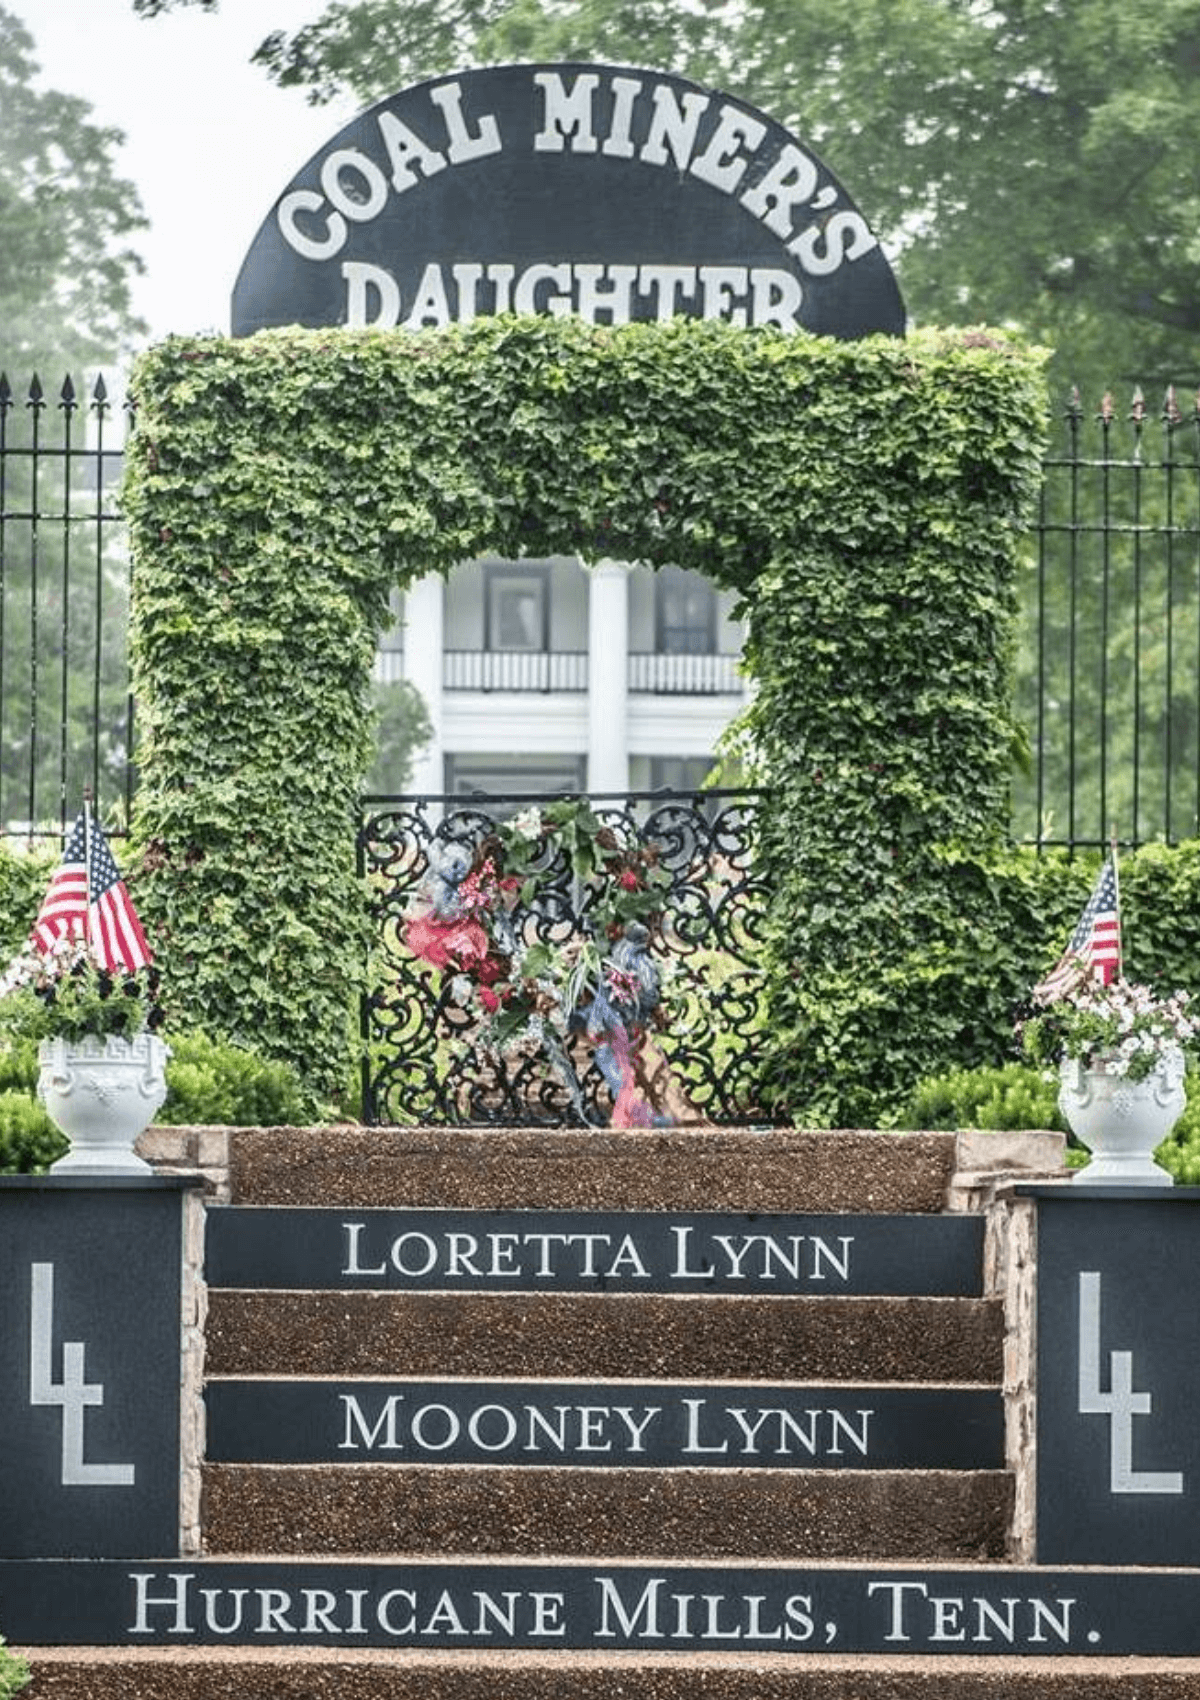 The most popular spot for photographs at Loretta Lynn's Ranch, situated in between Nashville and Memphis